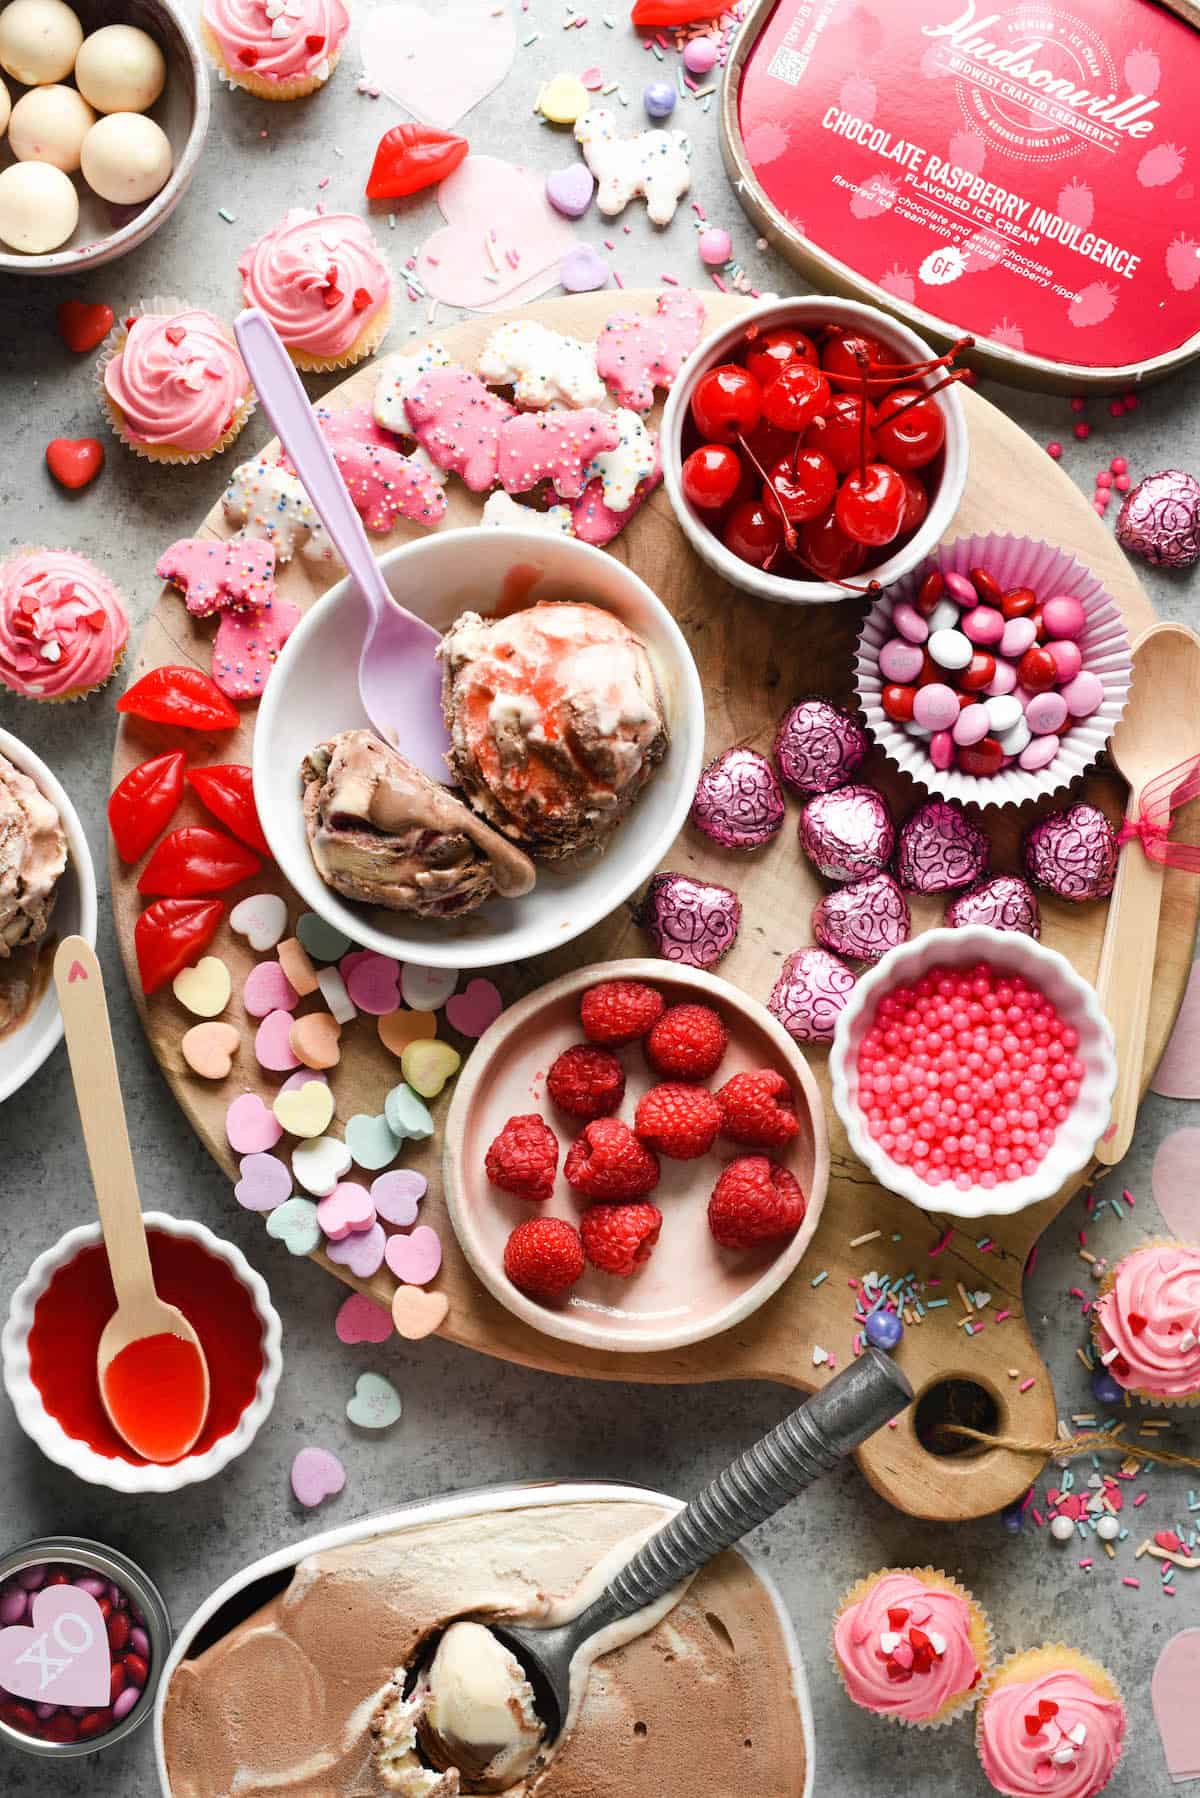 Make the holiday extra sweet with this dreamy Valentine's Day Dessert Board featuring ice cream, fruit, candies, chocolate and sprinkles! | foxeslovelemons.com